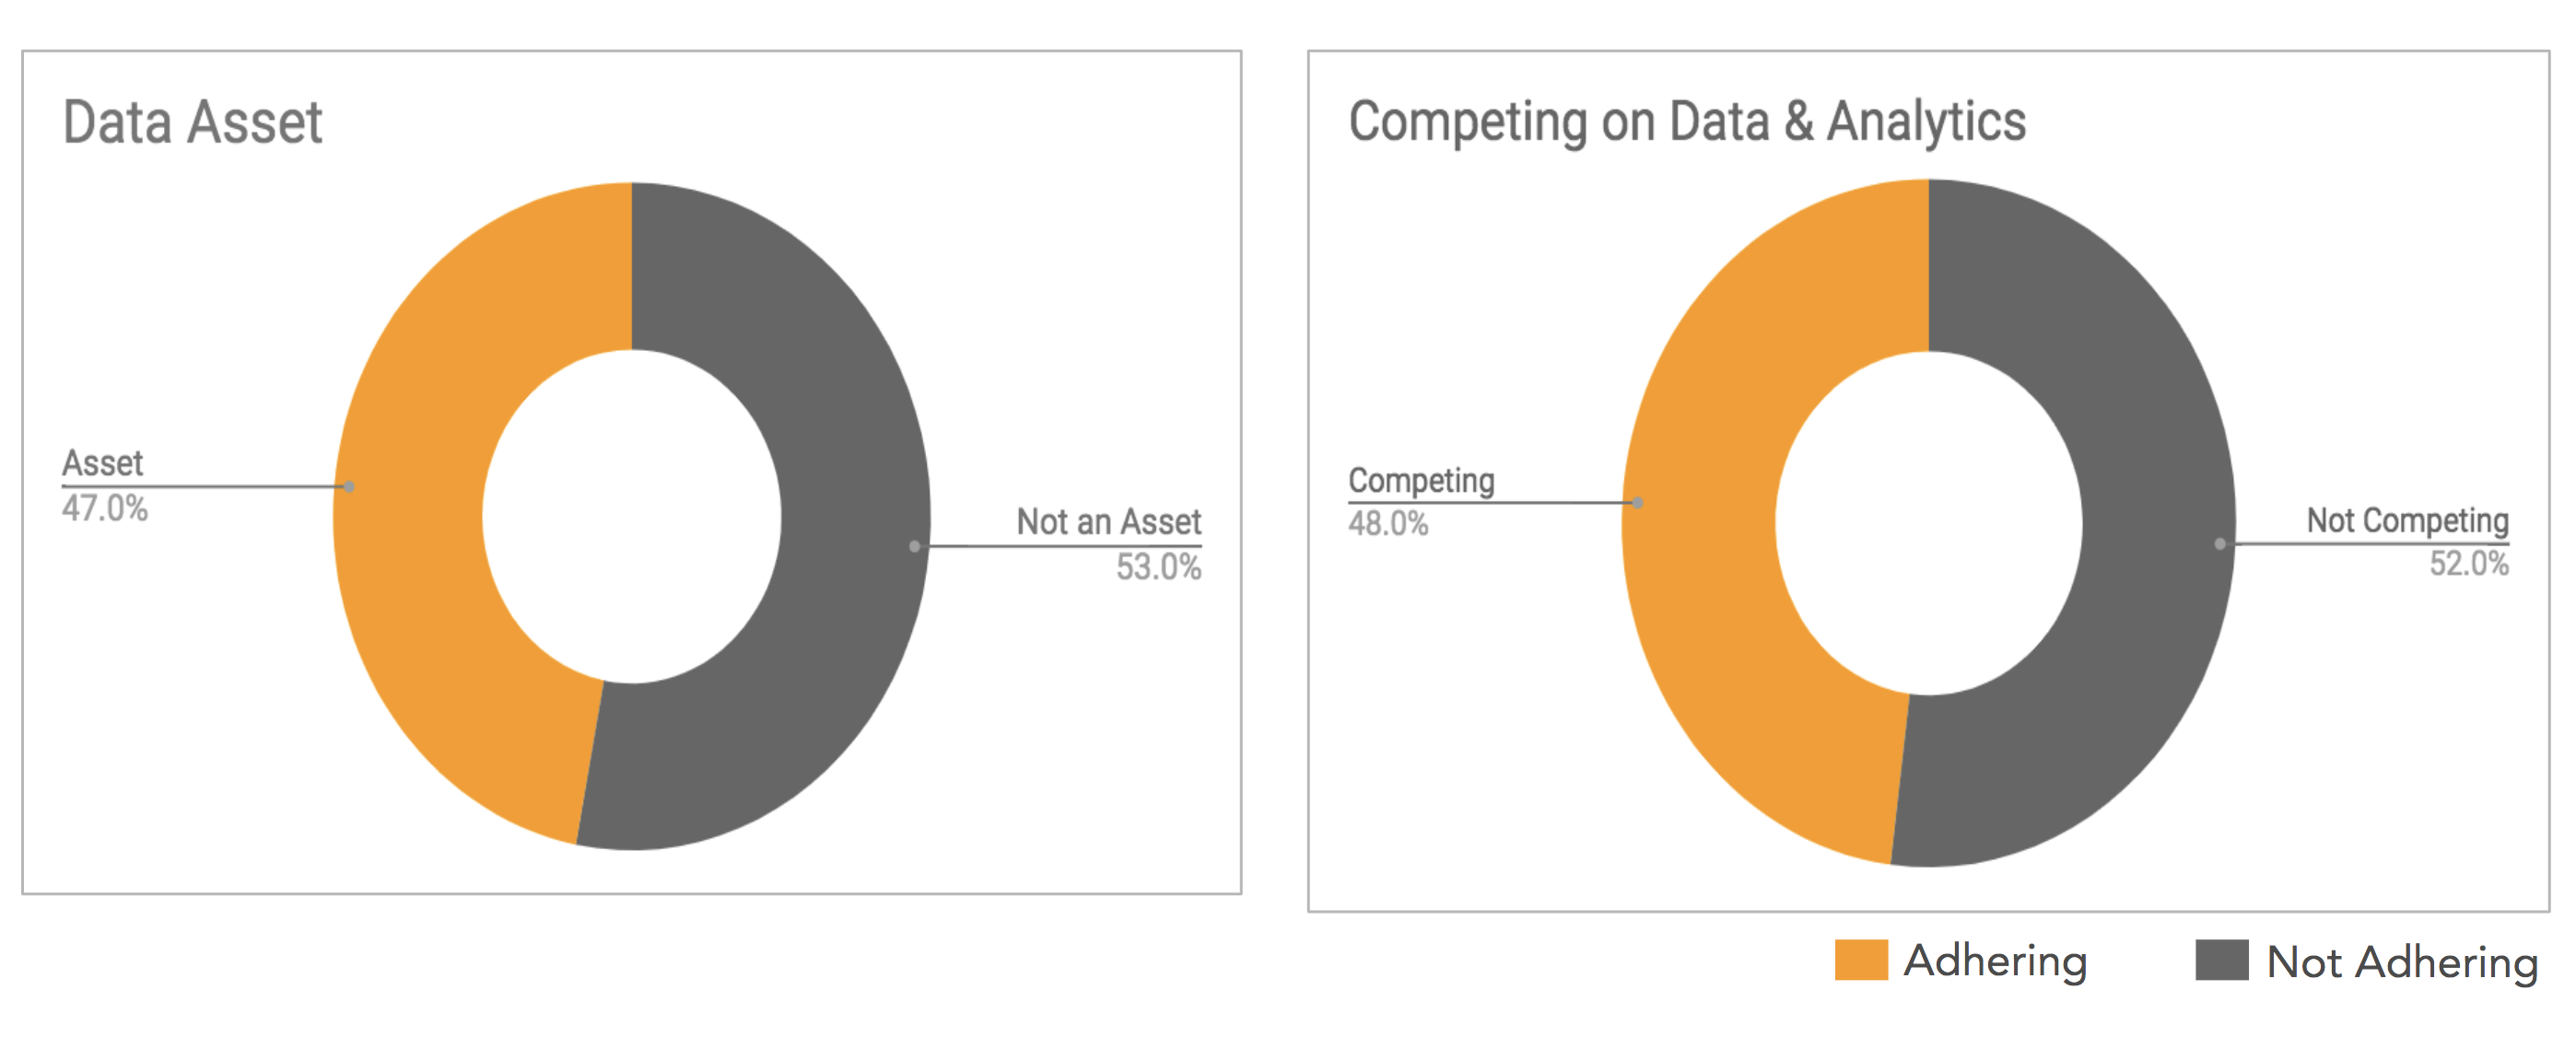 Data Asset and Competing on Data